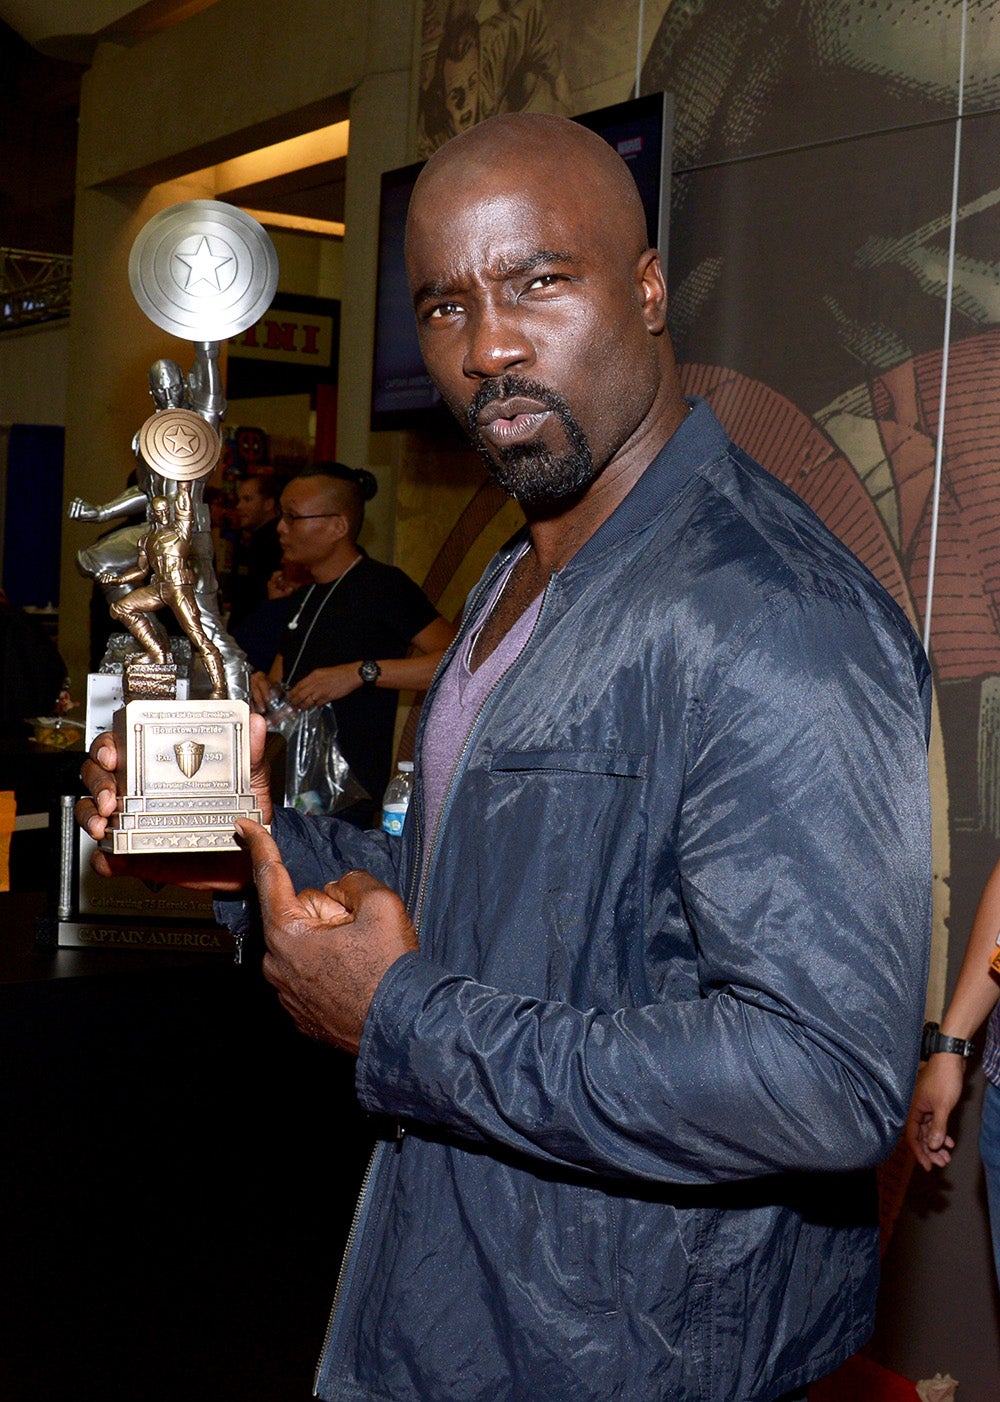 16 Unbelievably Sexy Photos Of 'Luke Cage' Star Mike Colter (You're Welcome!)
